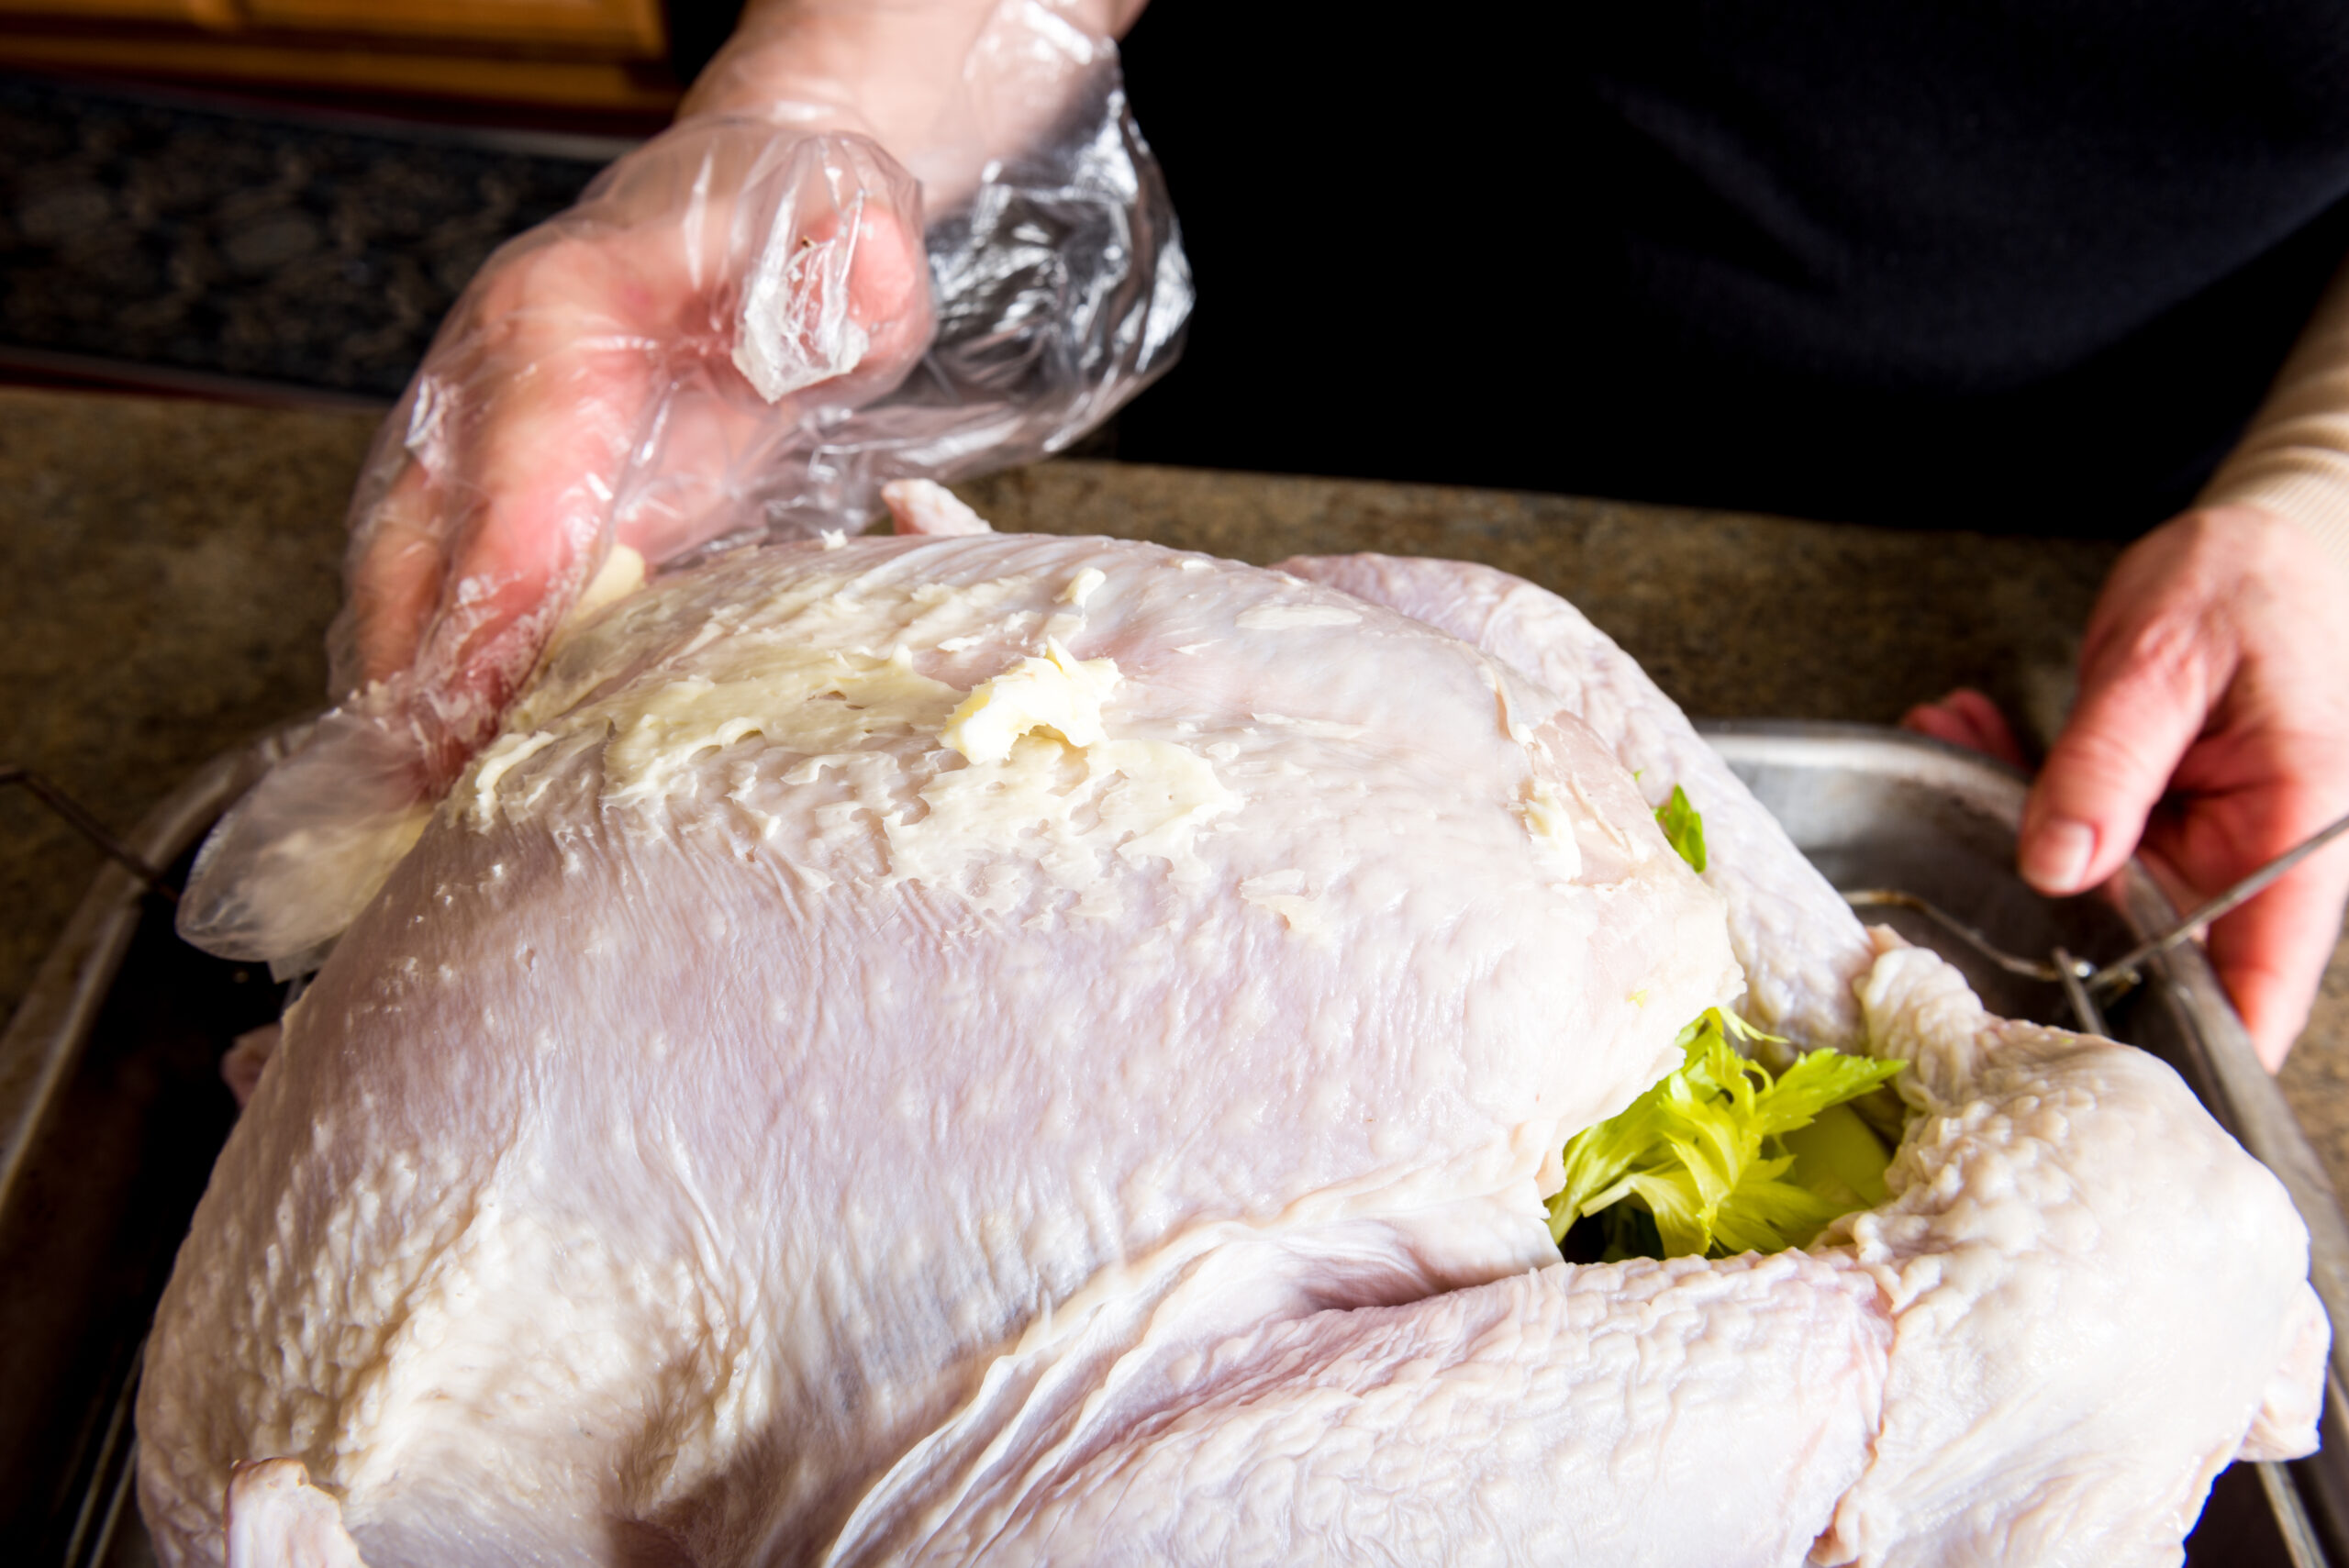 Applying the butter to the convection oven turkey